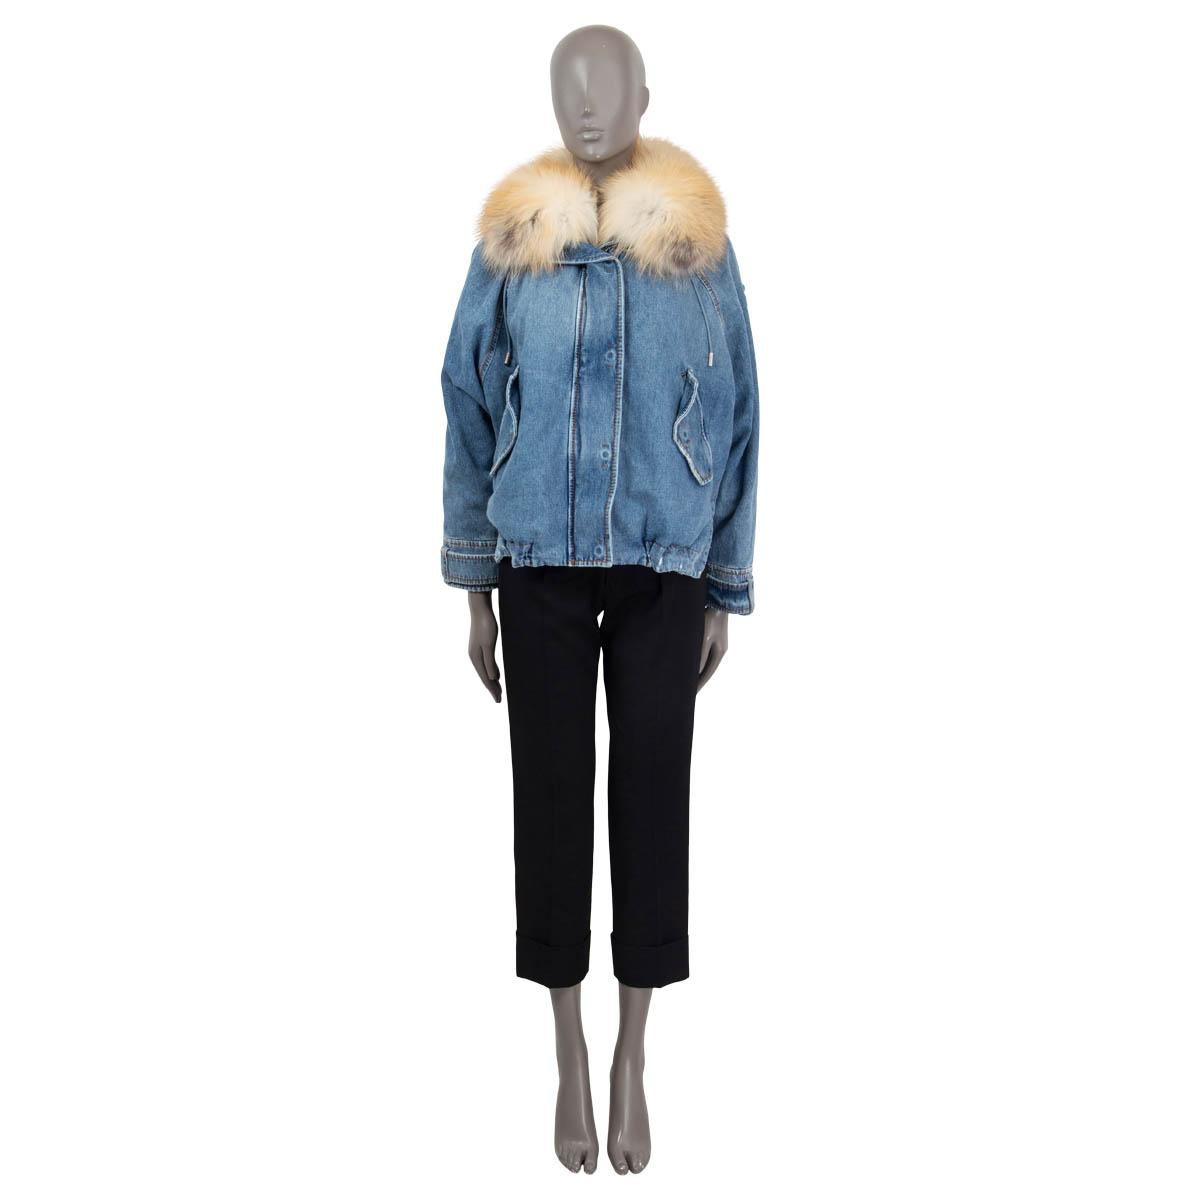 100% authentic Ermanno Scervino distressed hooded denim jacket in blue cotton (100%) with a detachable collar in fox fur (100%). Features long raglan sleeves (sleeve measurements taken from the neck) and two buttoned flap pockets on the front. Has a